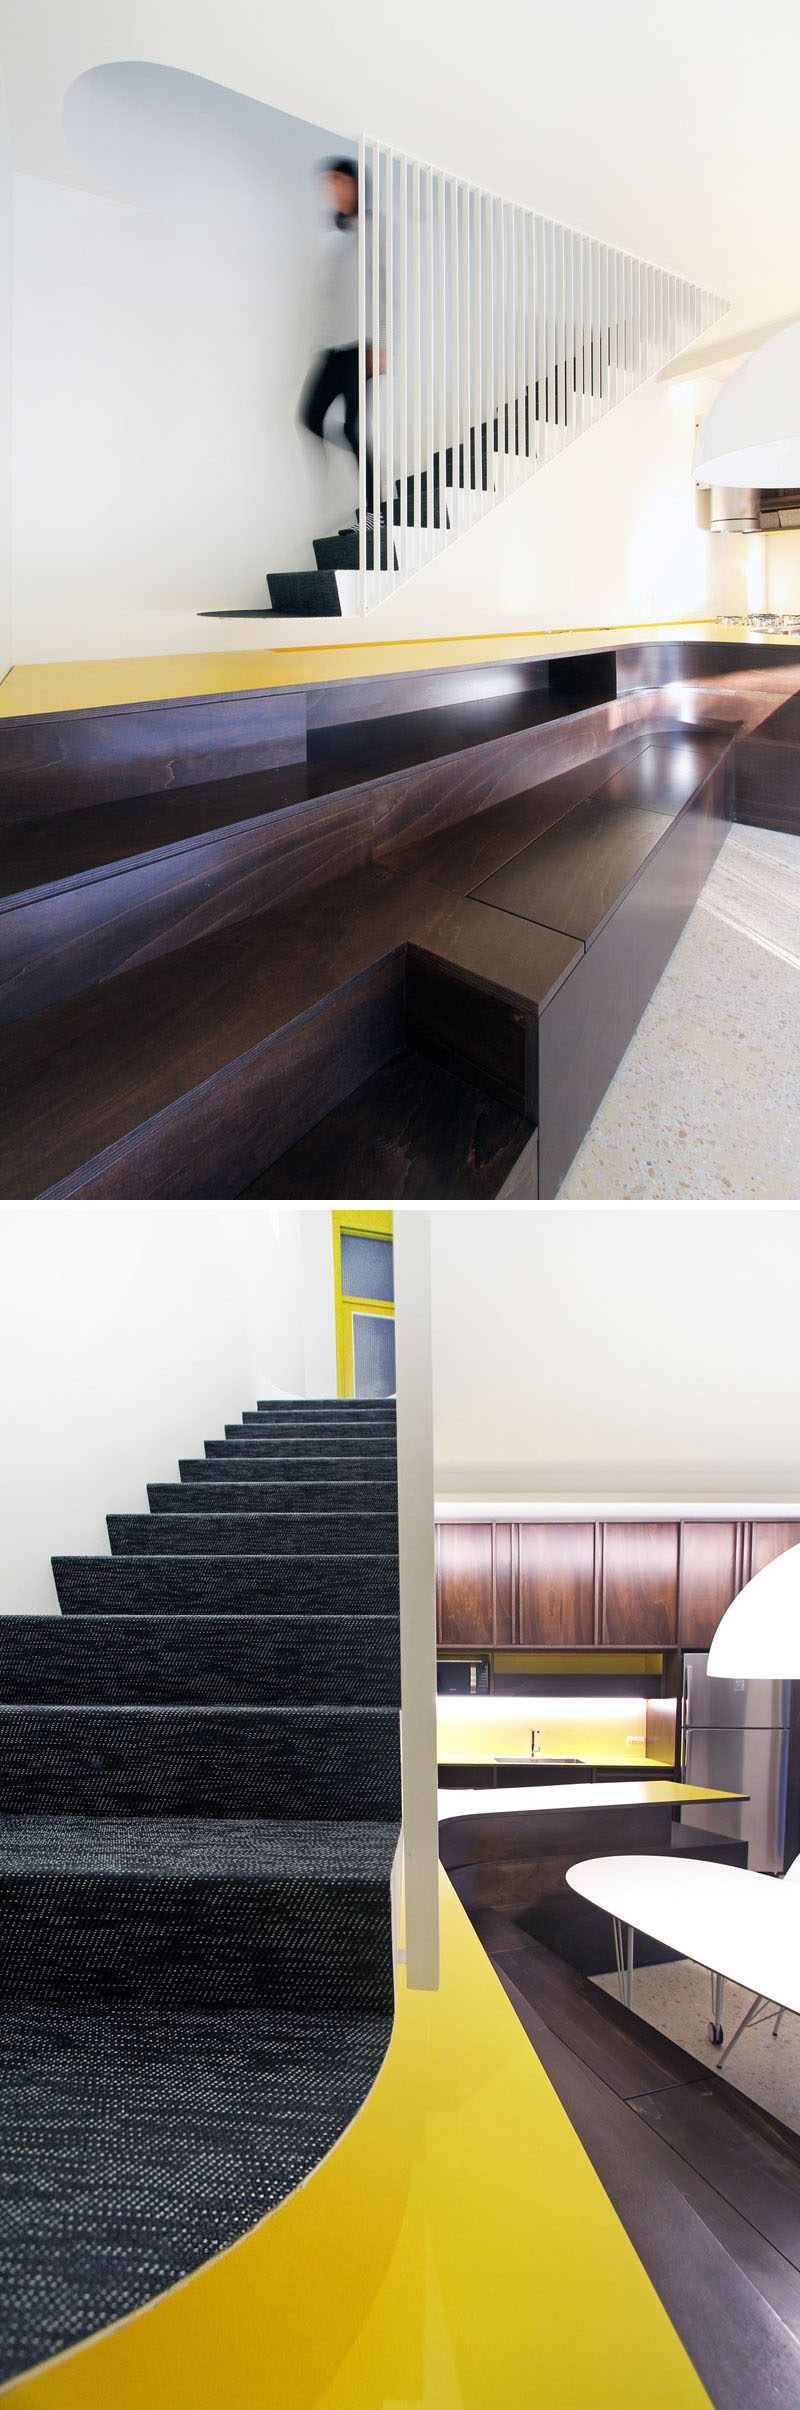 Architect Francesca Perani and Bloomscape Architecture have designed modern stairs that are accessed via the extended kitchen countertop and a built-in bench in the dining area. #Stairs #Staircase